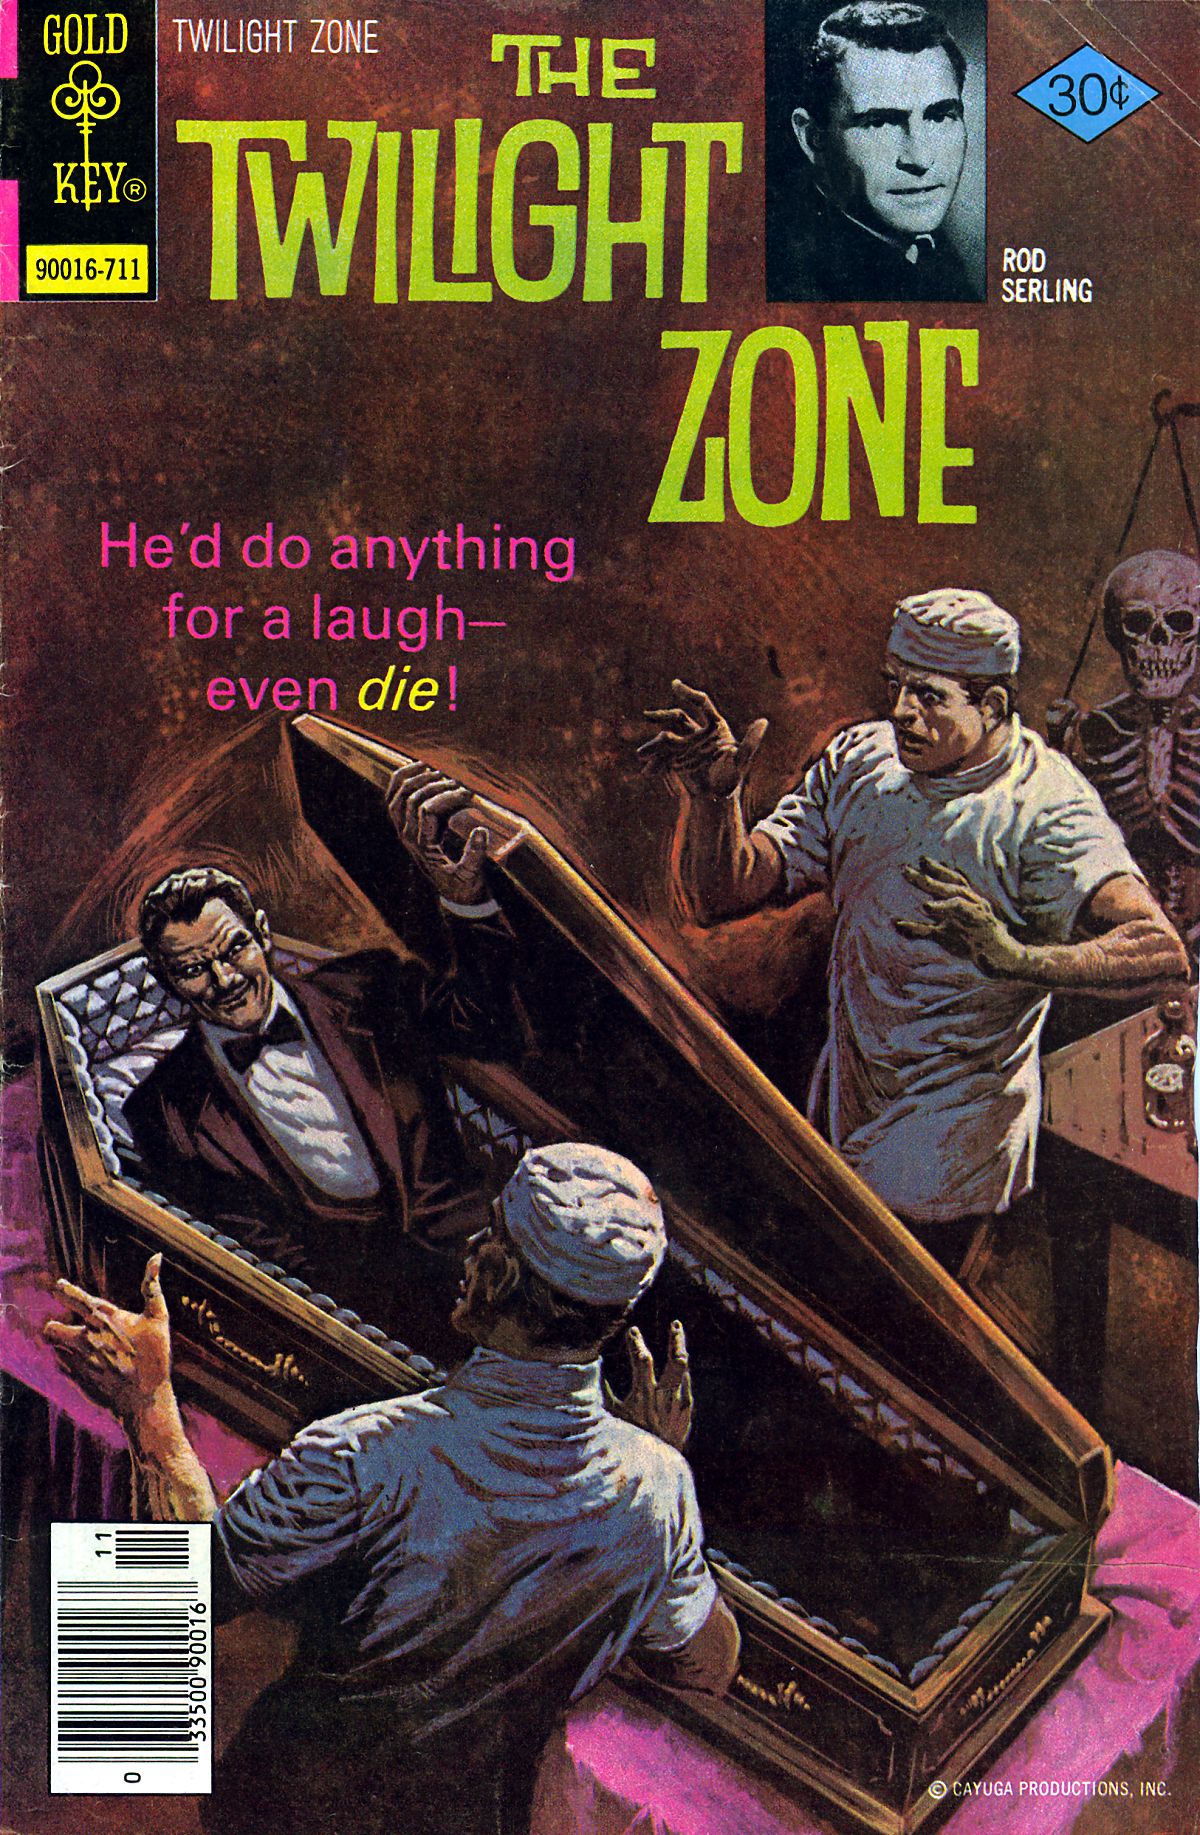 The Twilight Zone 1962 Issue 81 | Read The Twilight Zone 1962 Issue 81  comic online in high quality. Read Full Comic online for free - Read comics  online in high quality .|